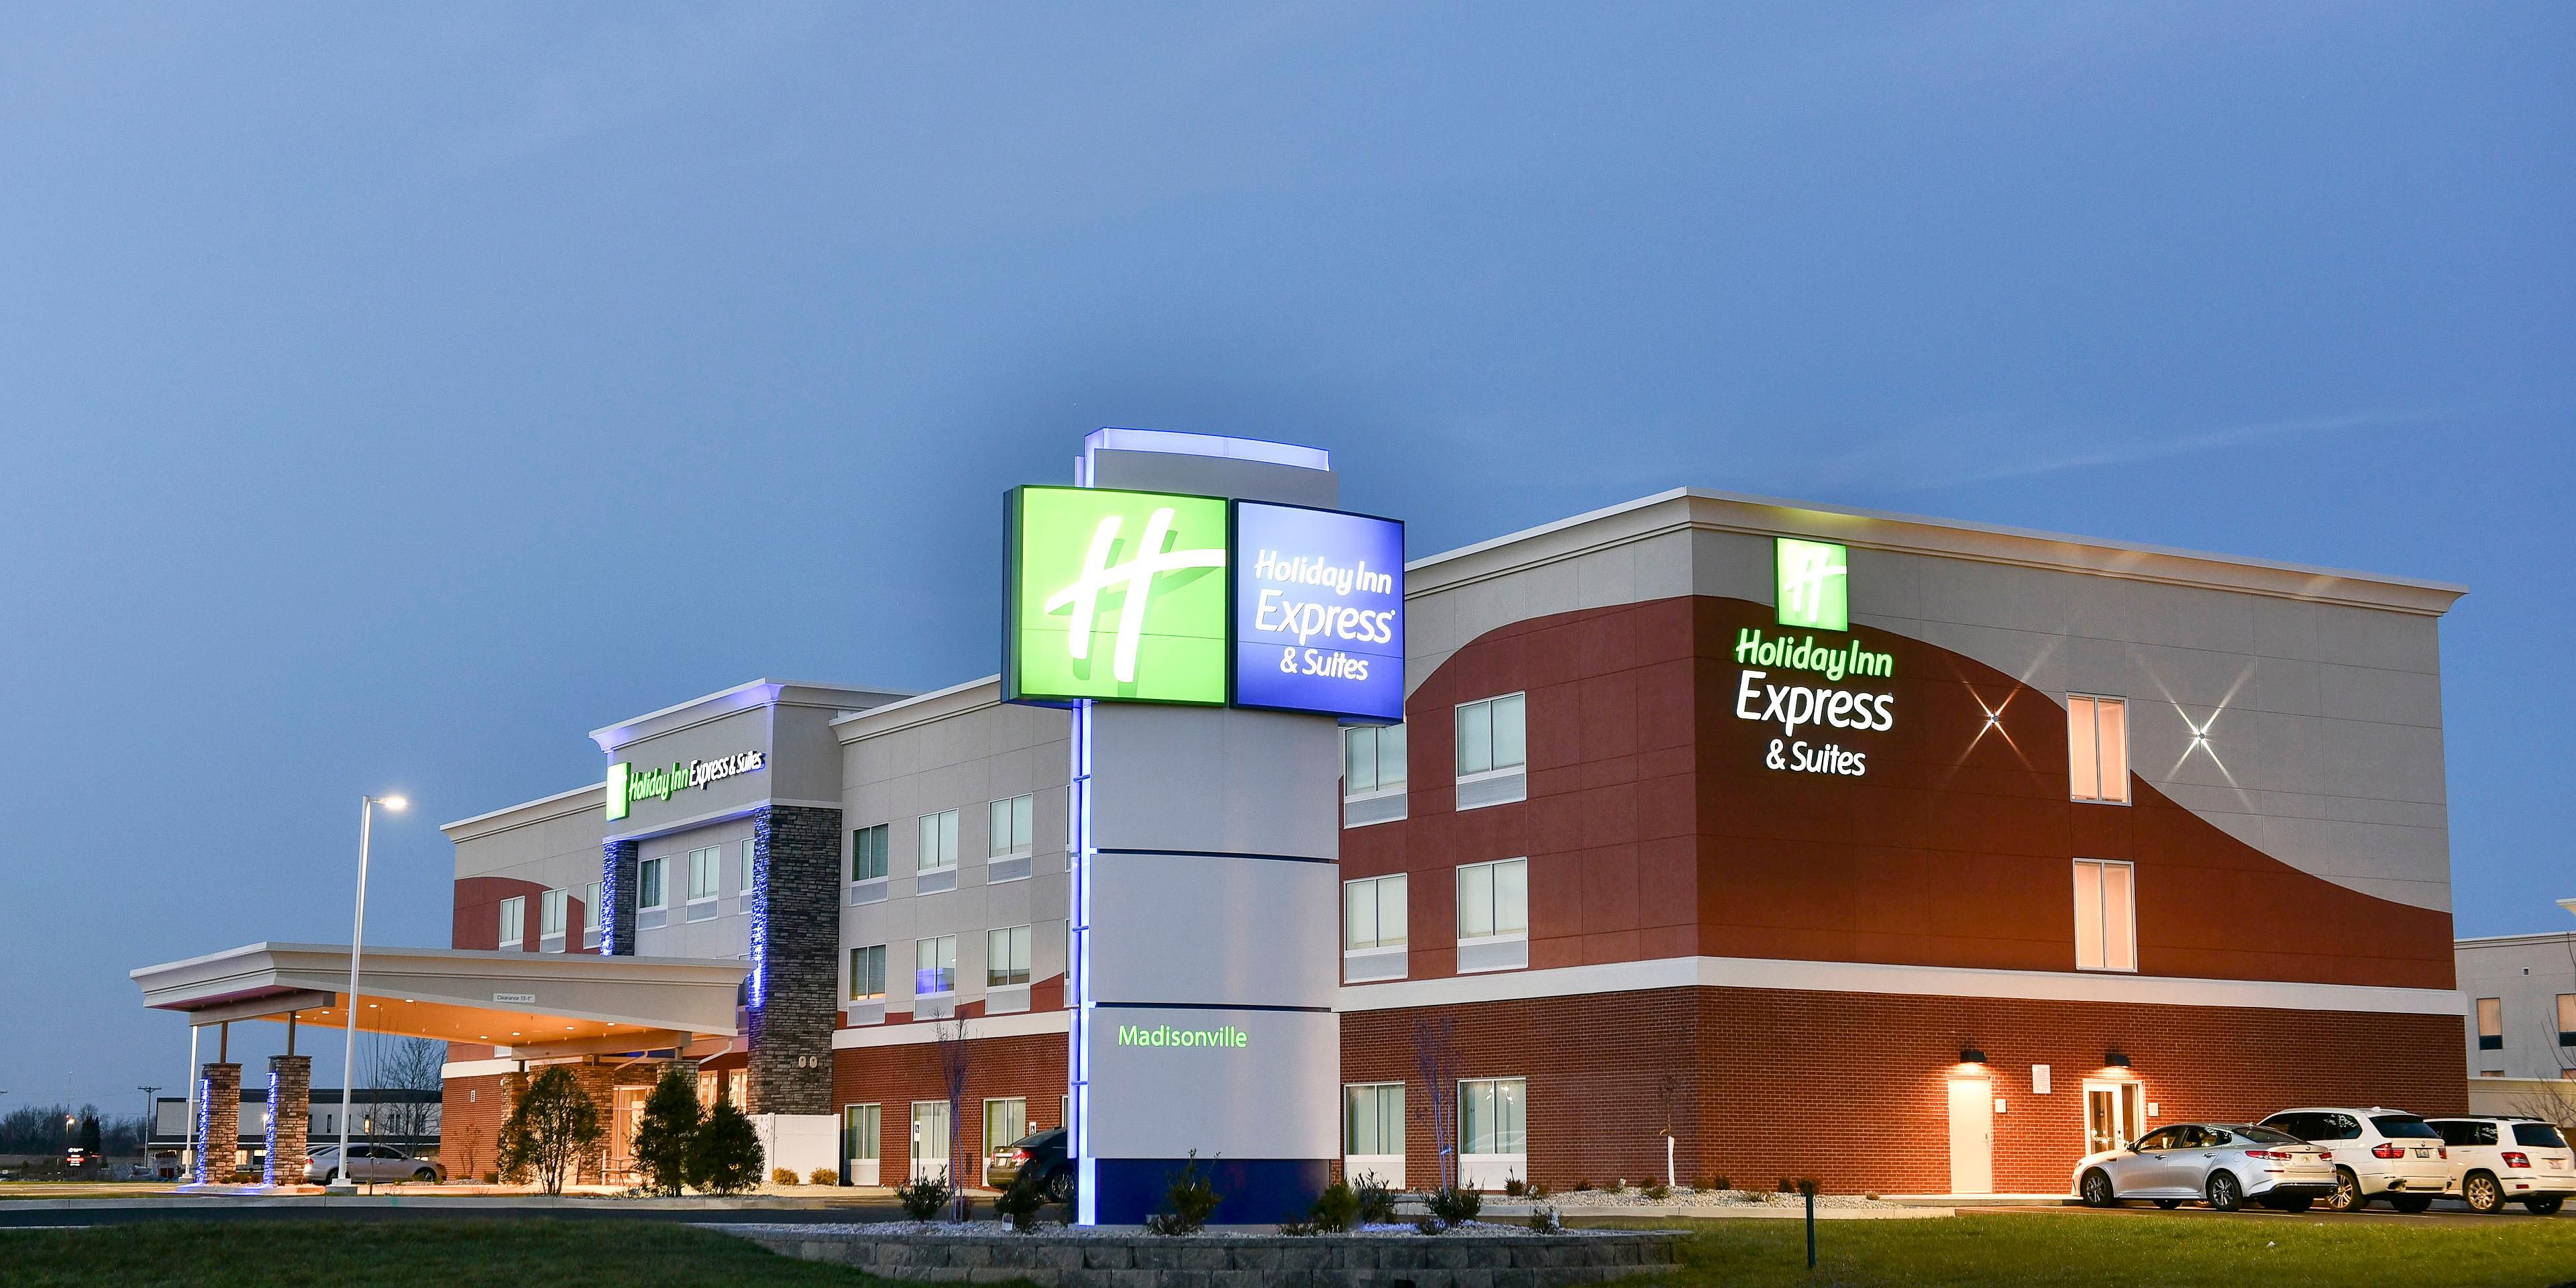 Our brand new Holiday Inn Express & Suites Madisonville opened our doors on September 17, 2019! We are here to serve guests traveling in to visit cities like Hopkinsville, Henderson, Central City, and Hanson. Ask about our services and amenities to learn more about how we can make your stay feel like your home away from home!